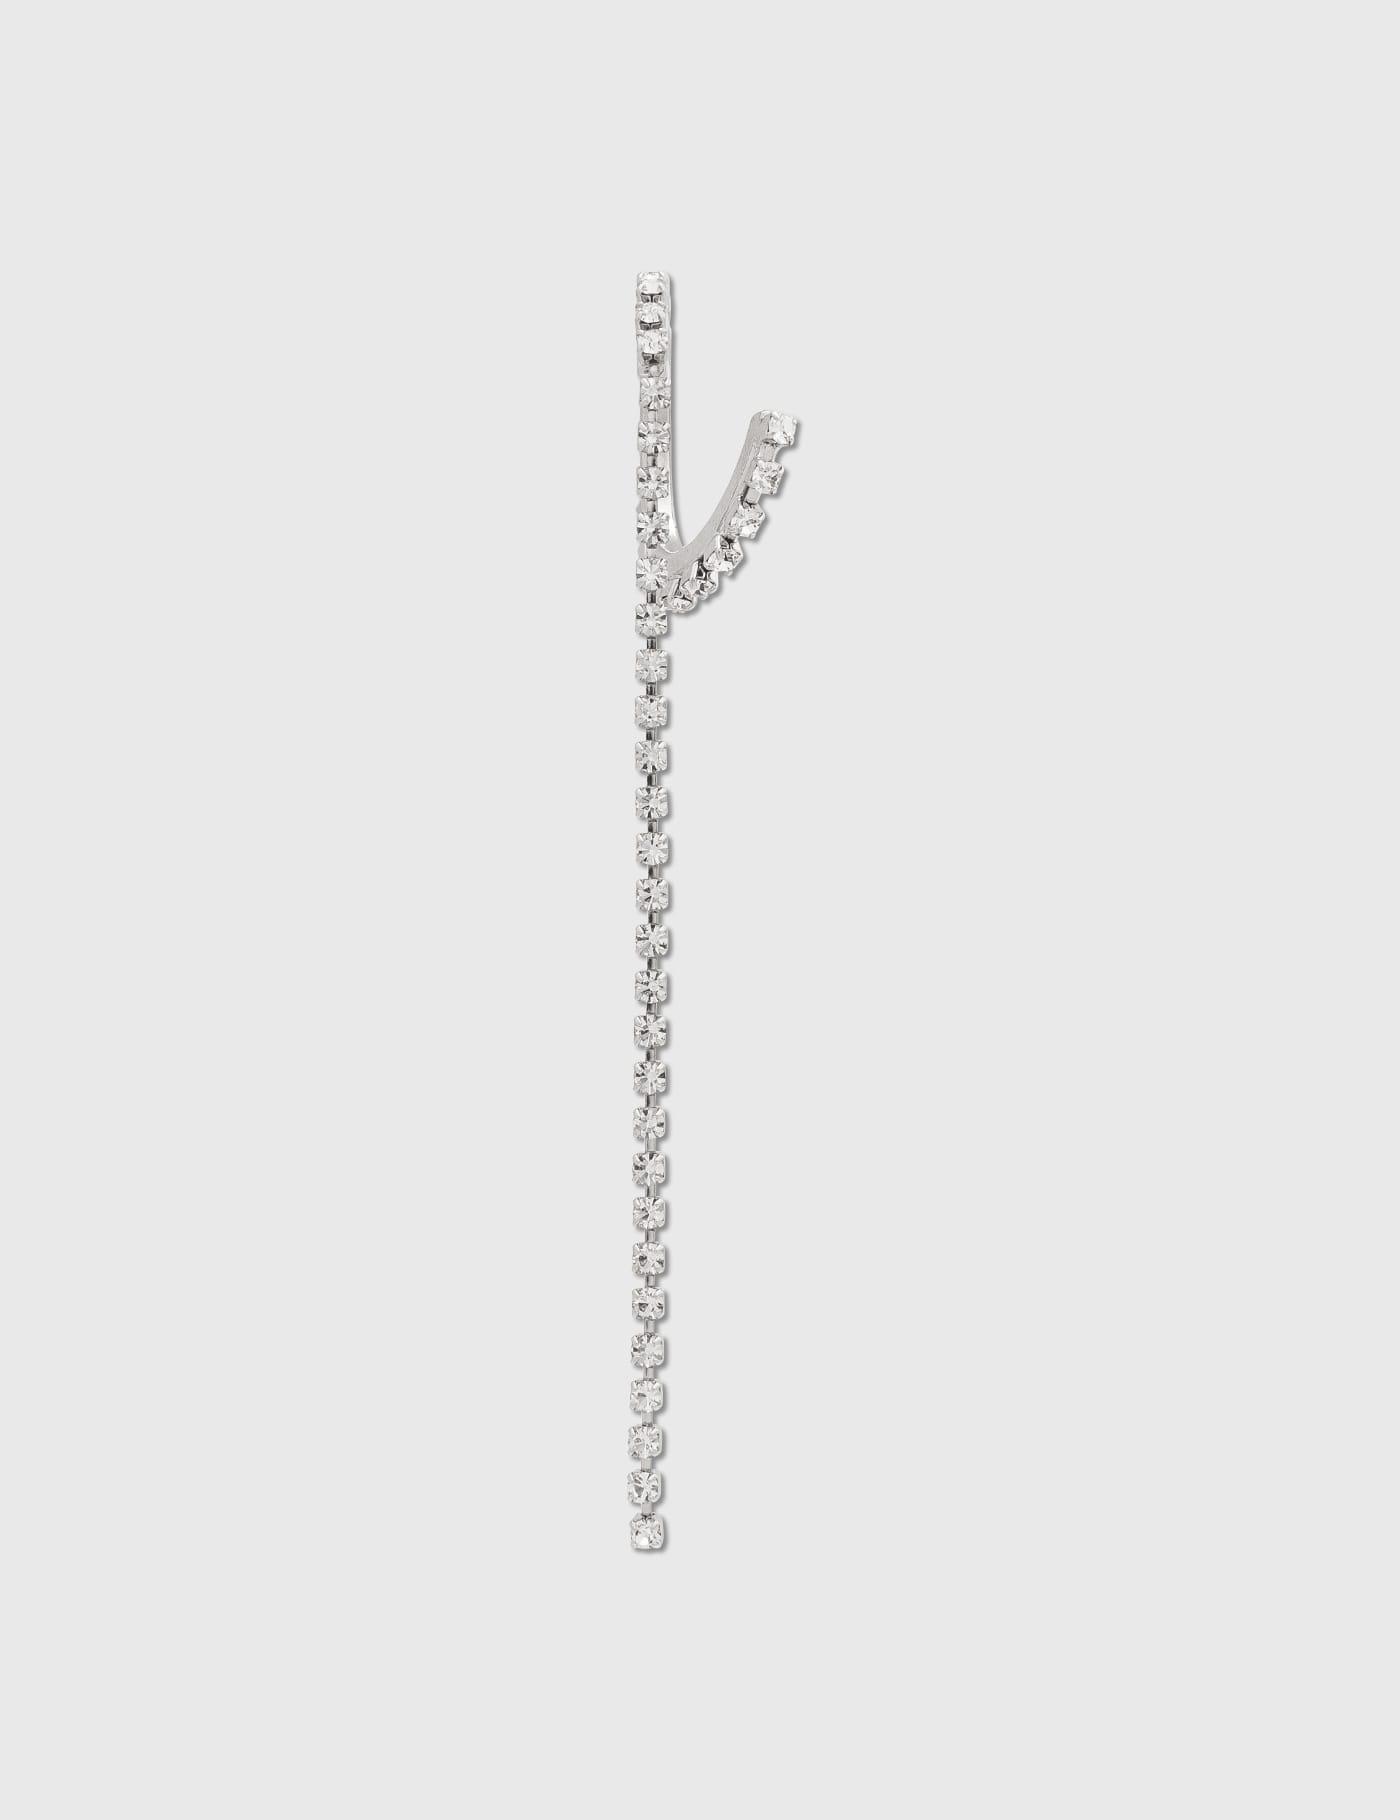 Justine Clenquet - Telly Ear Cuff | HBX - Globally Curated Fashion